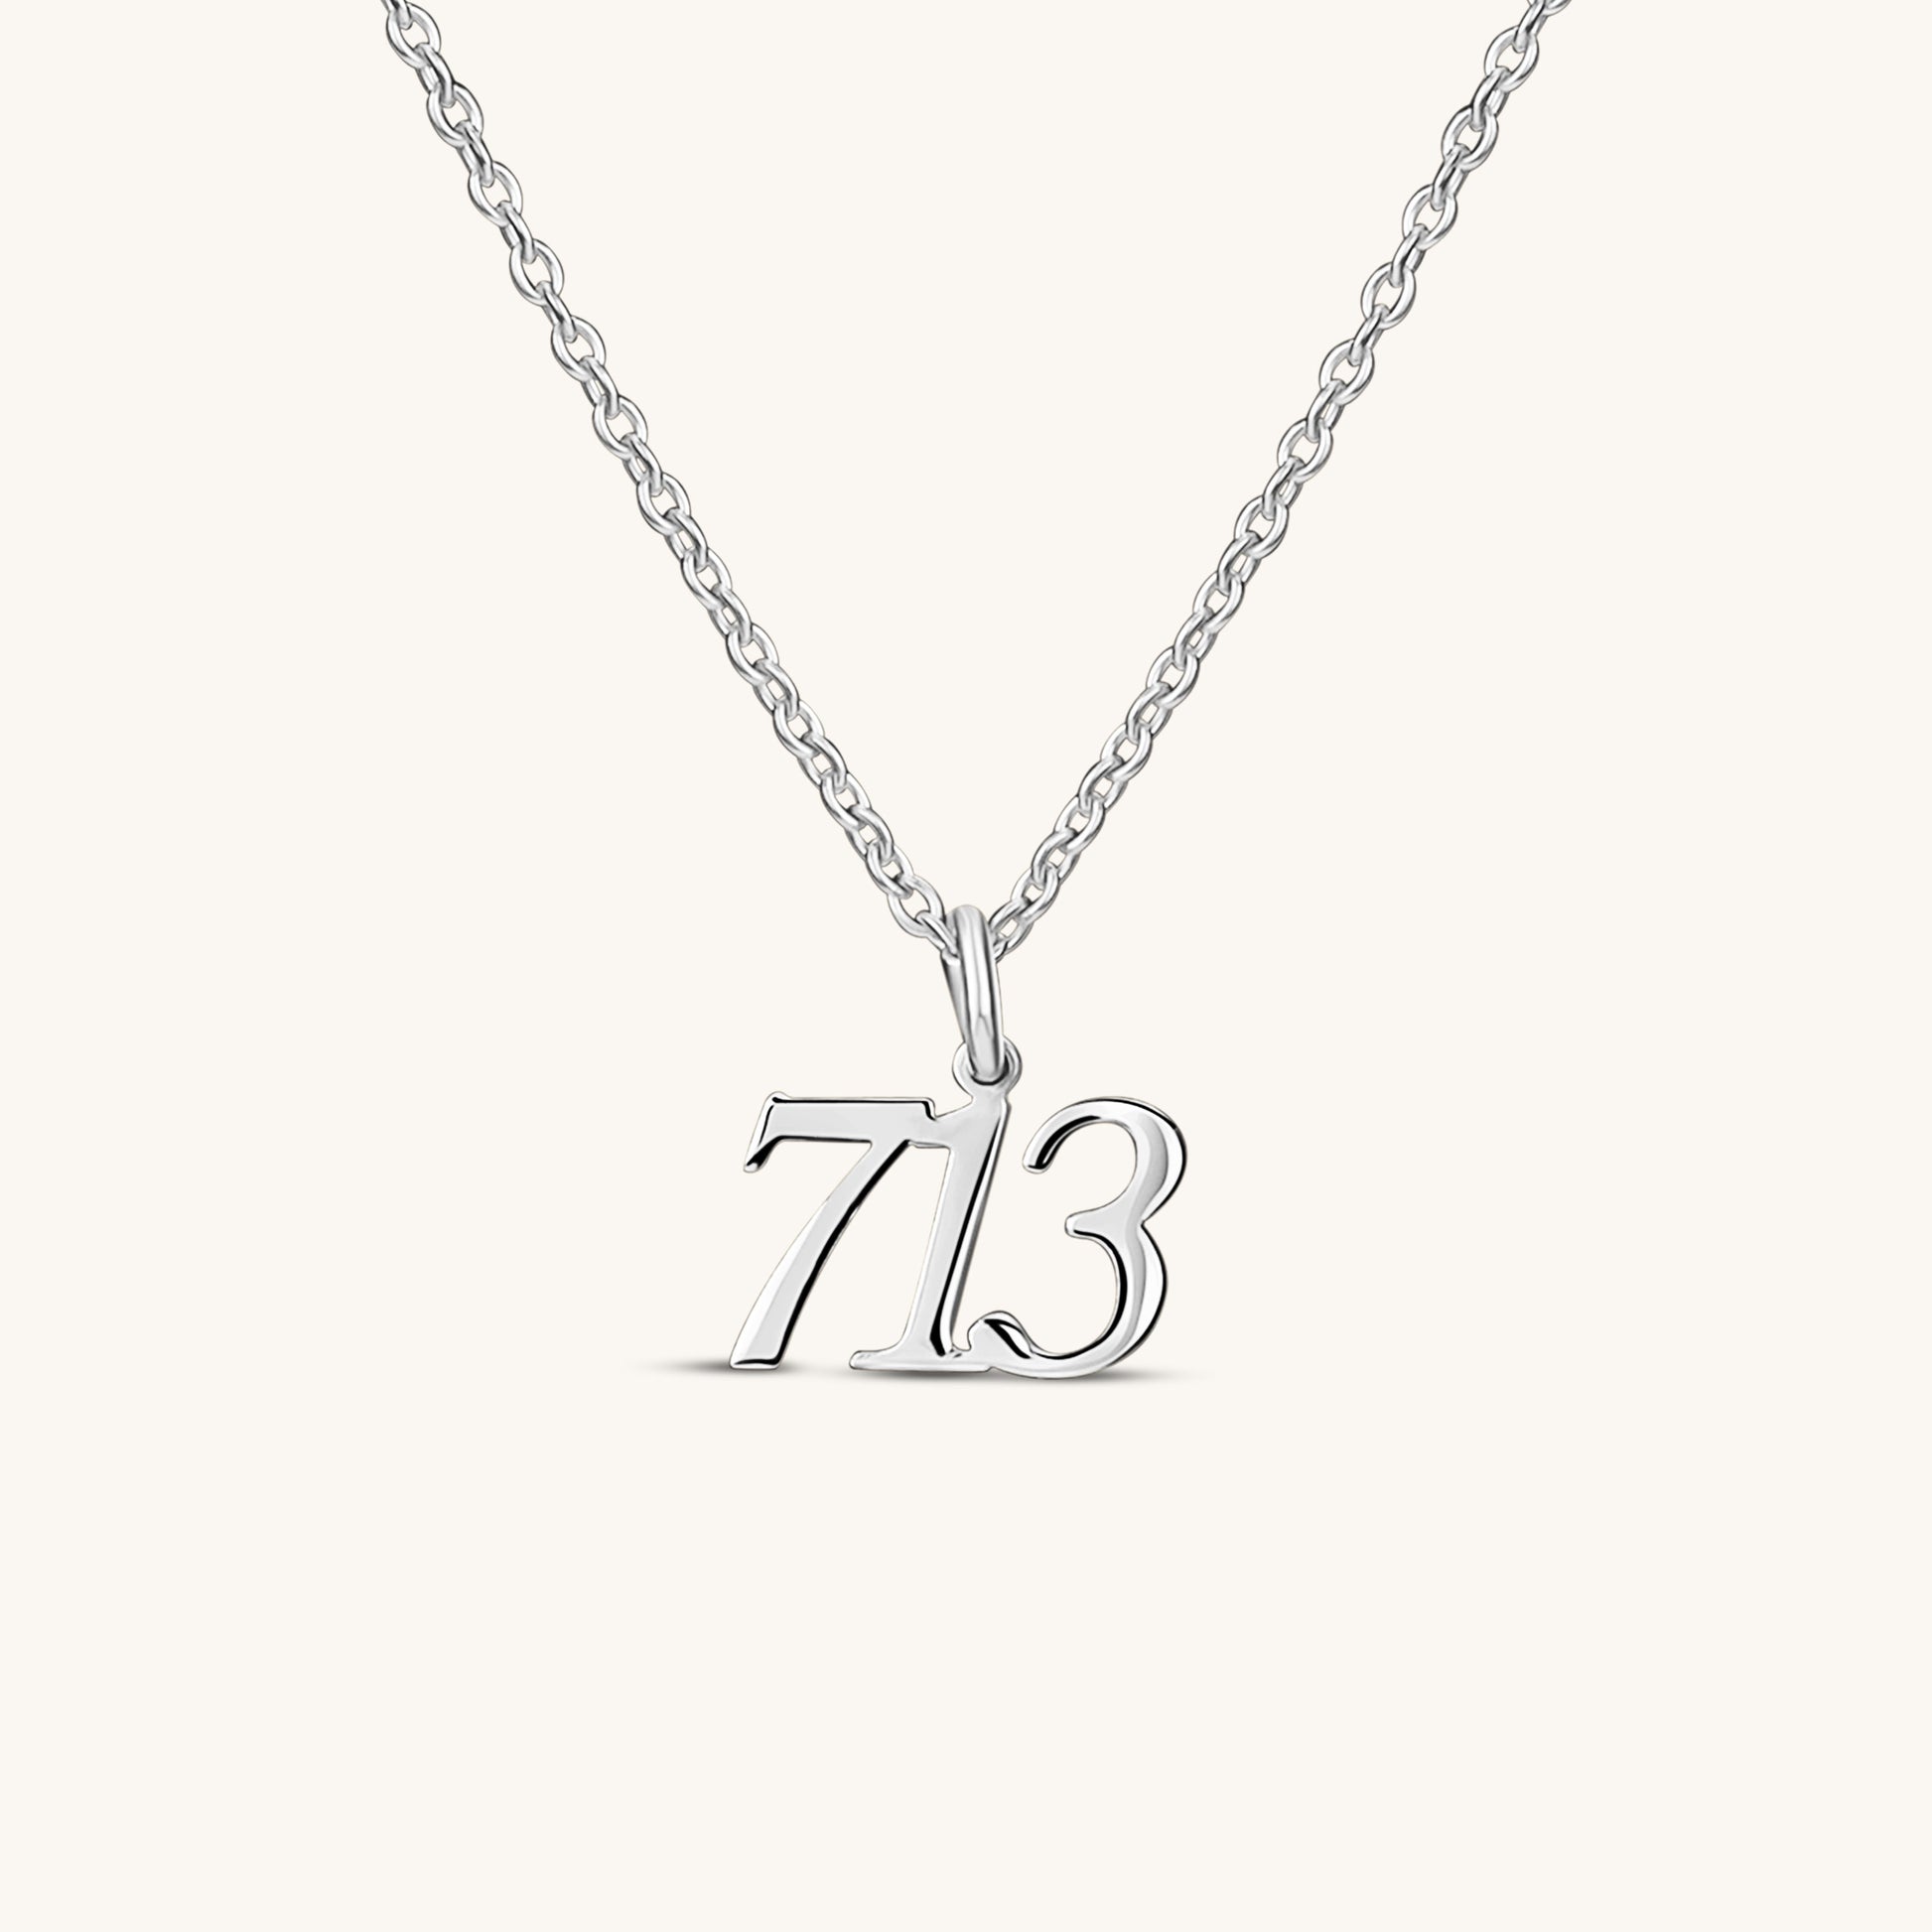 Area Code Number Necklace - Keepsakes